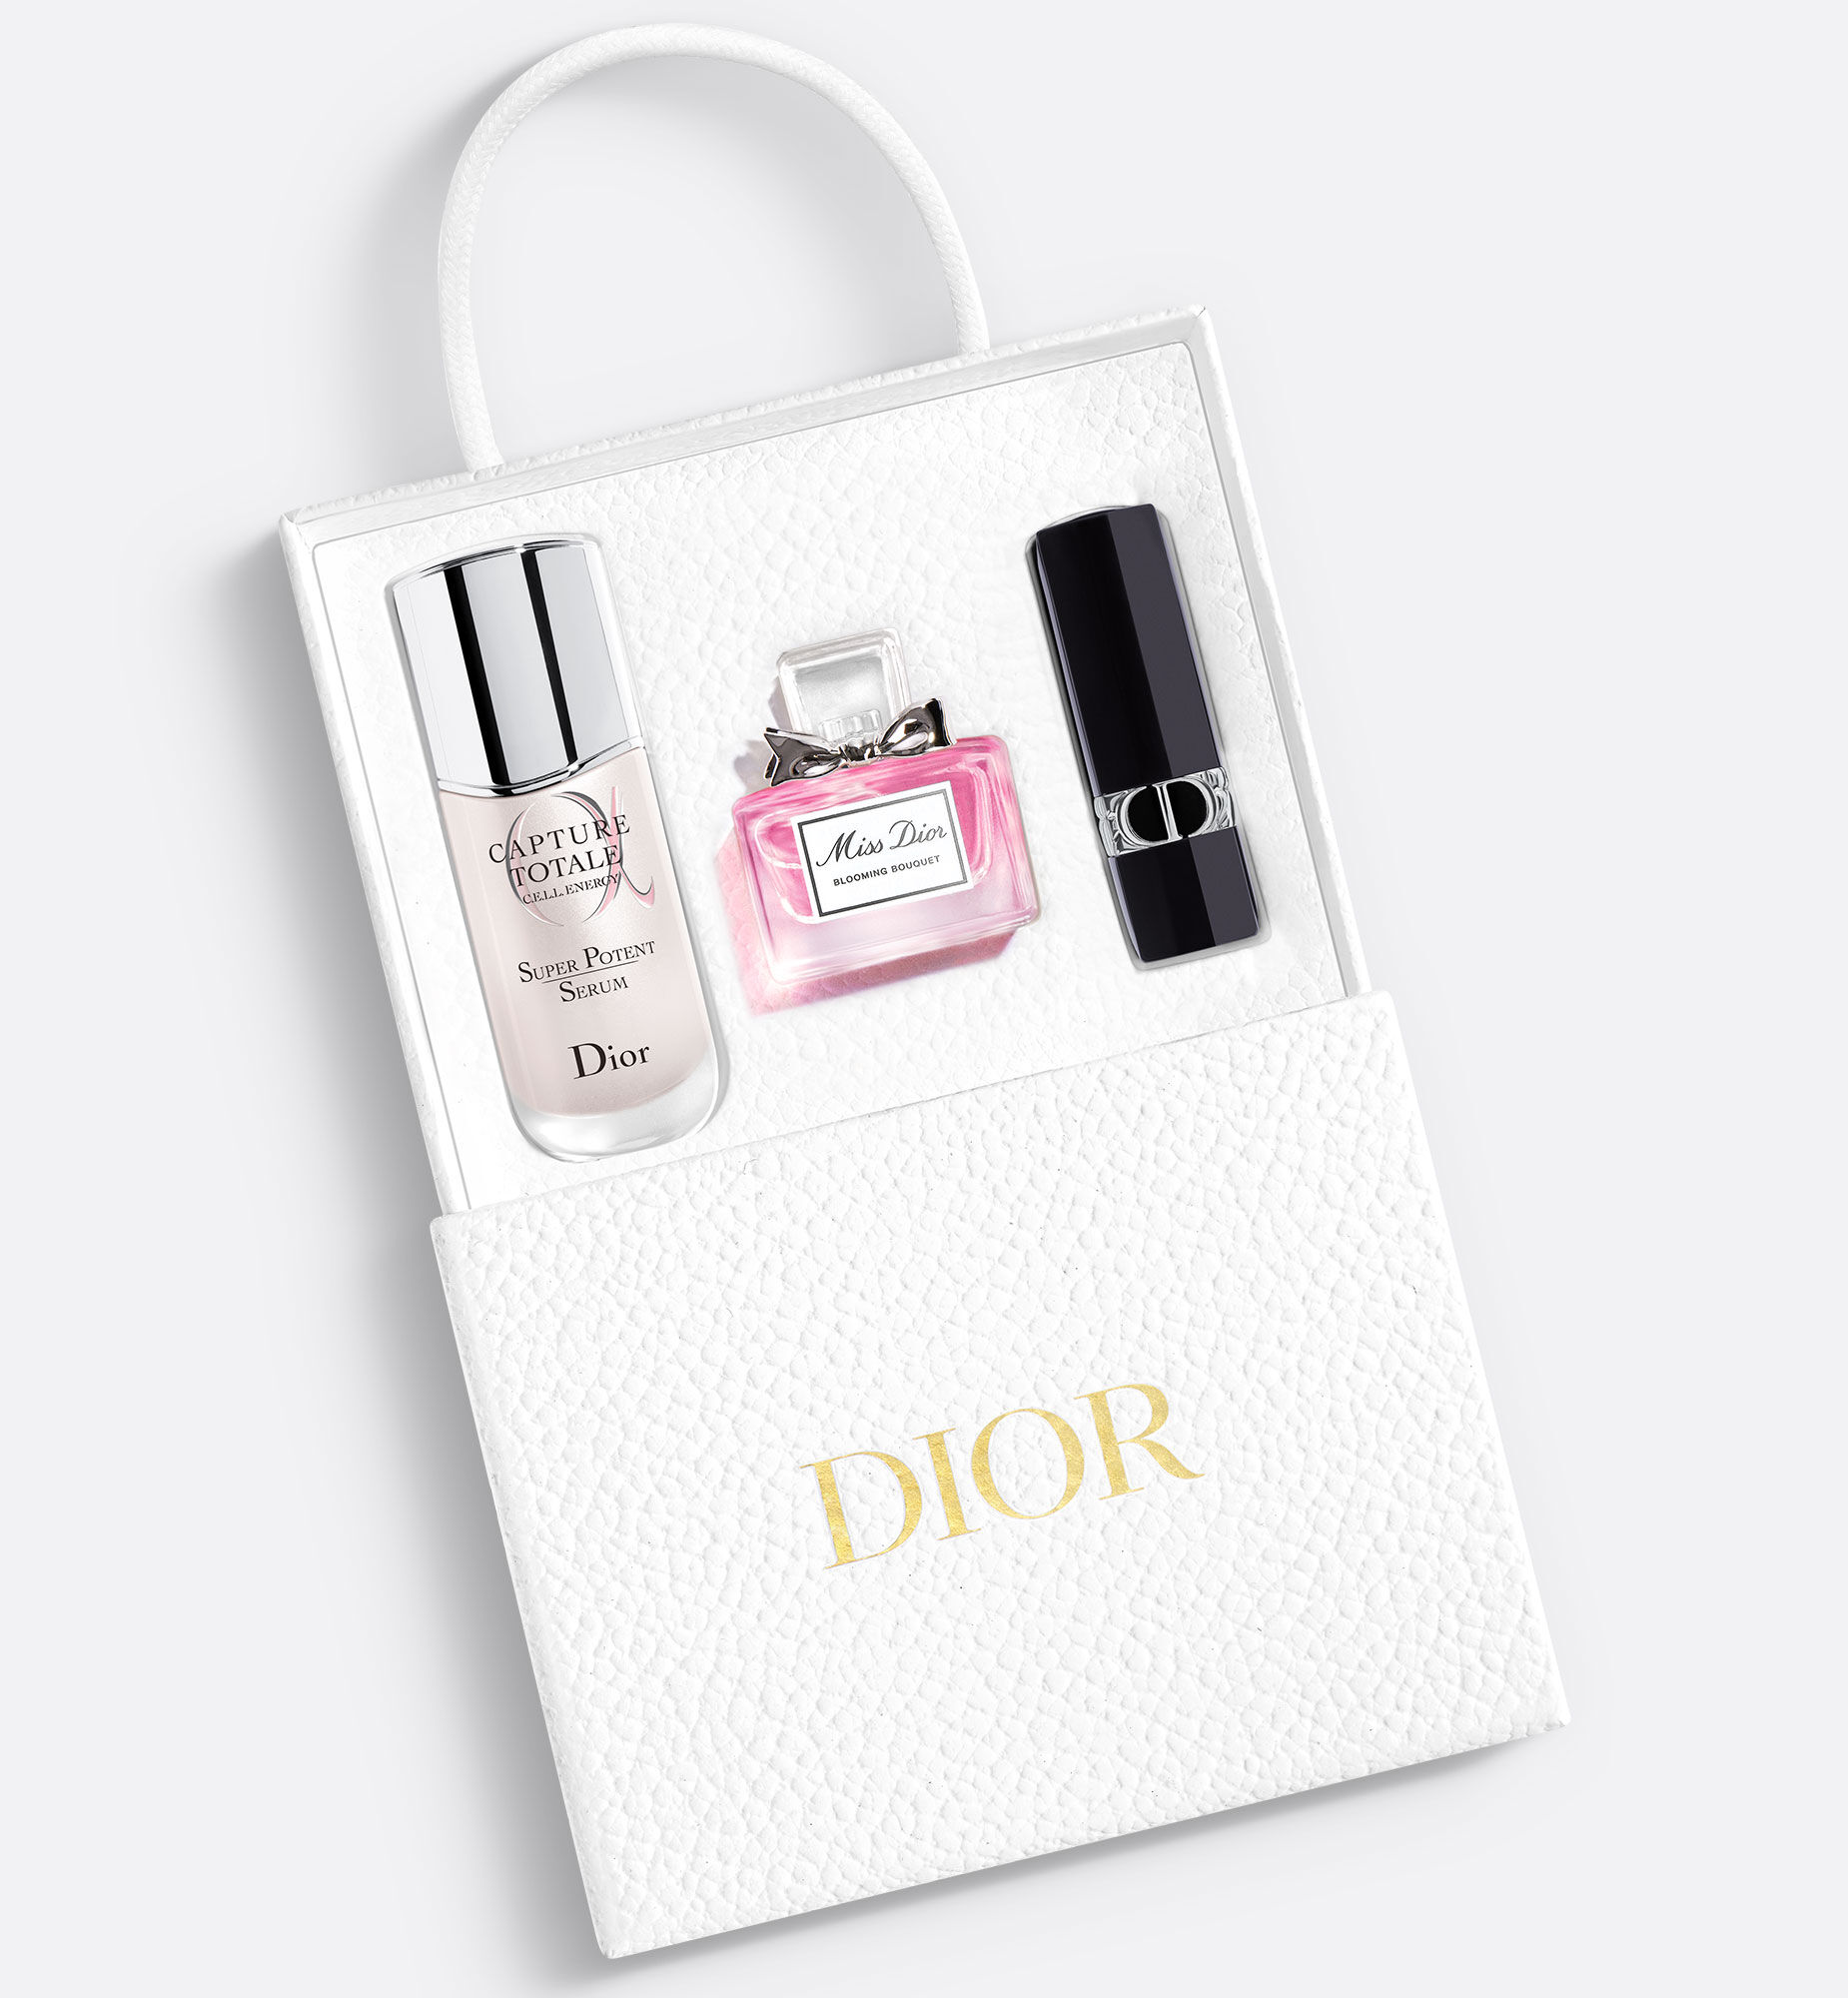 Gift Set of perfume Dior 5 fragrances in minivials of 5 ml